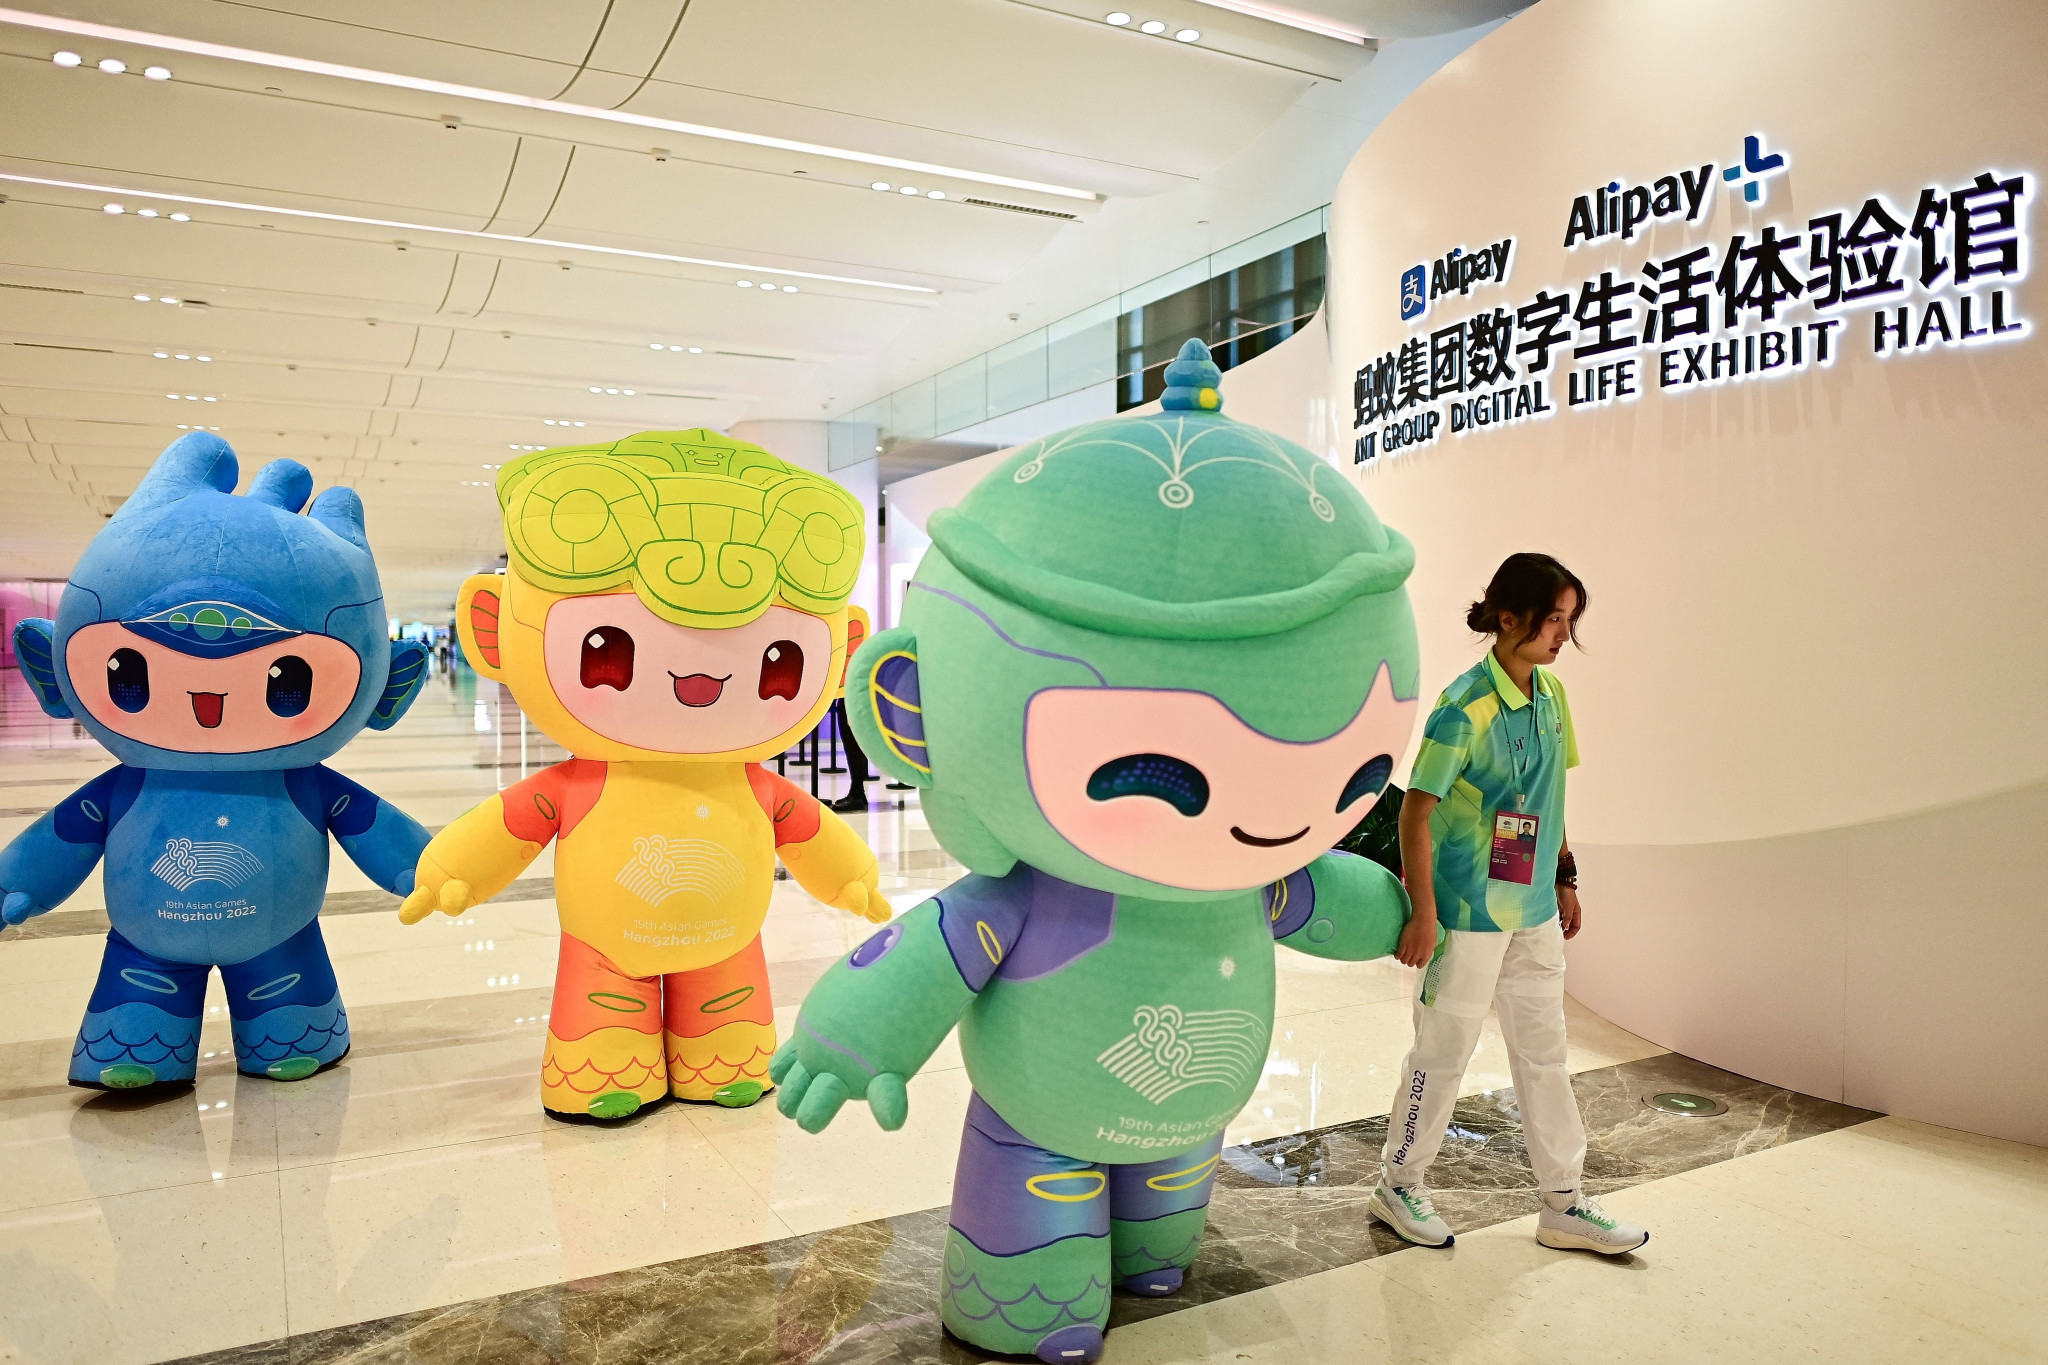 Chenchen, left, is one of Hangzhou 2022's mascots that will exchange gifts for compliments ©Getty Images